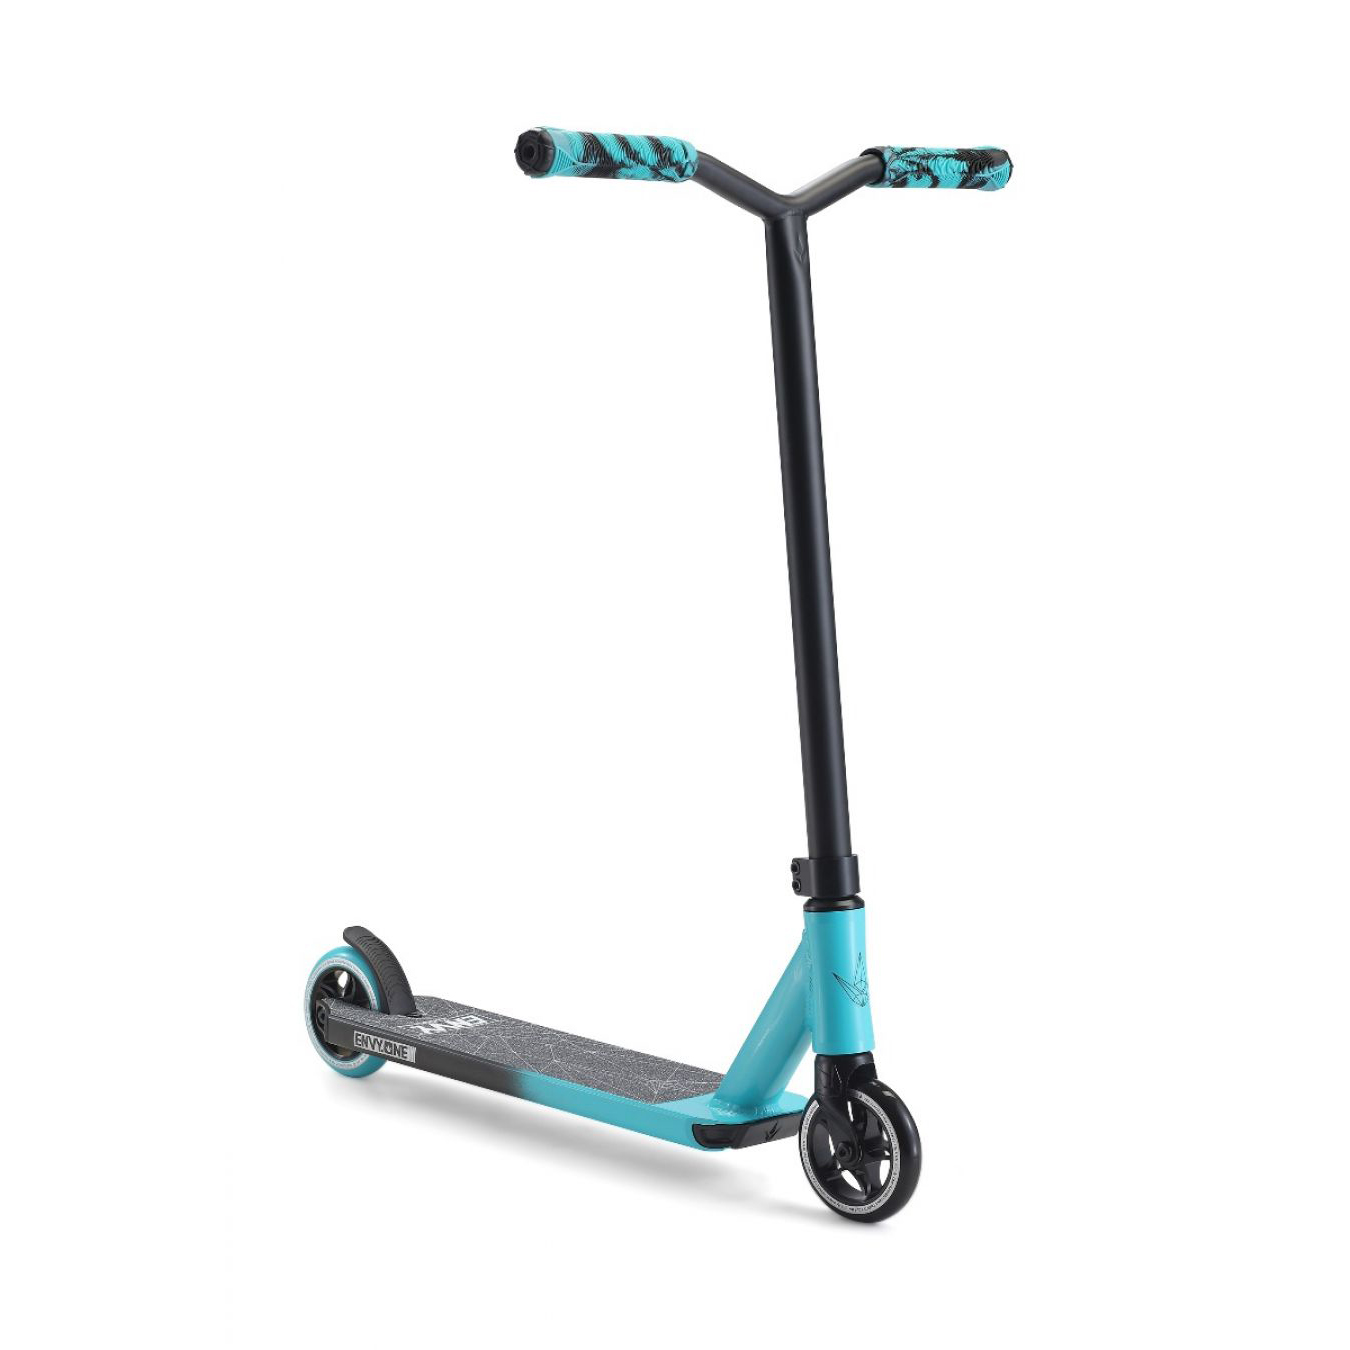 Envy Series One S3 Complete Scooter - Compare and Save | ProScooter